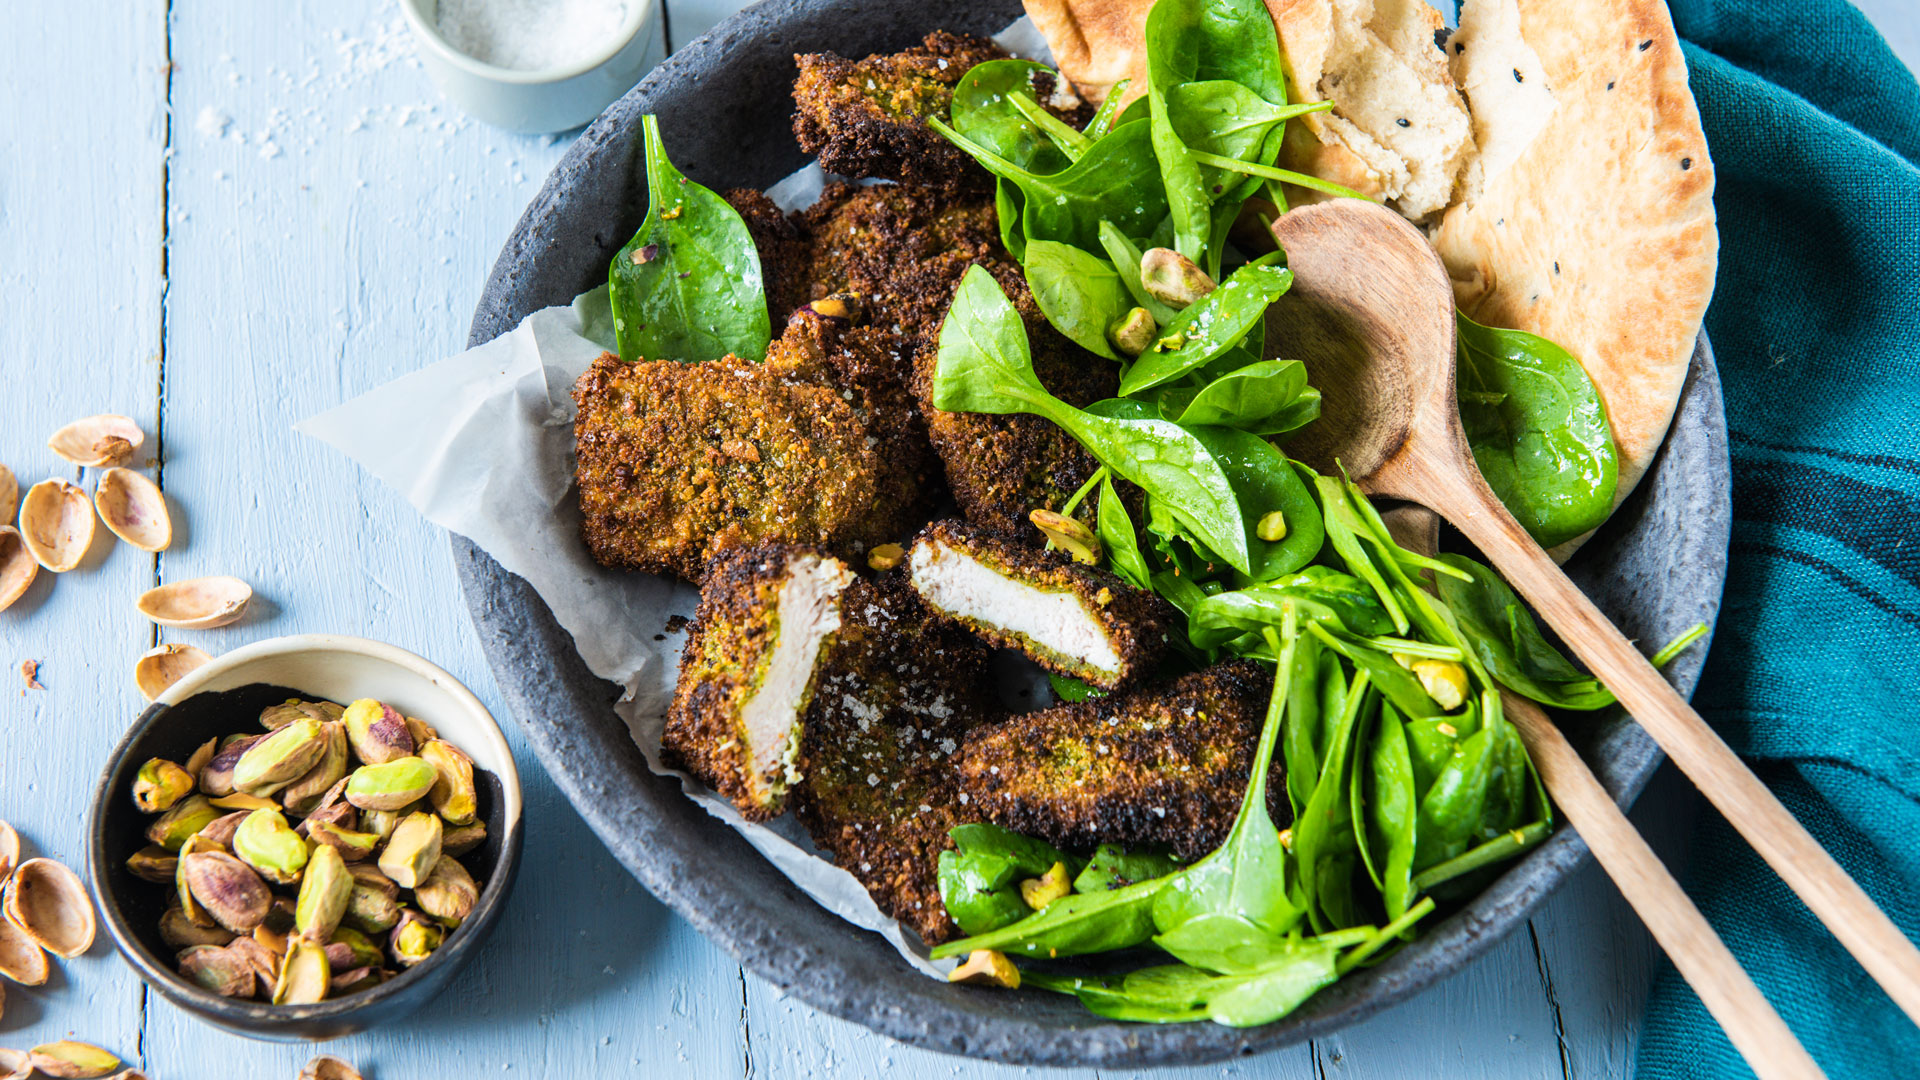 Spinach and Pistachio-crusted Chicken Breast